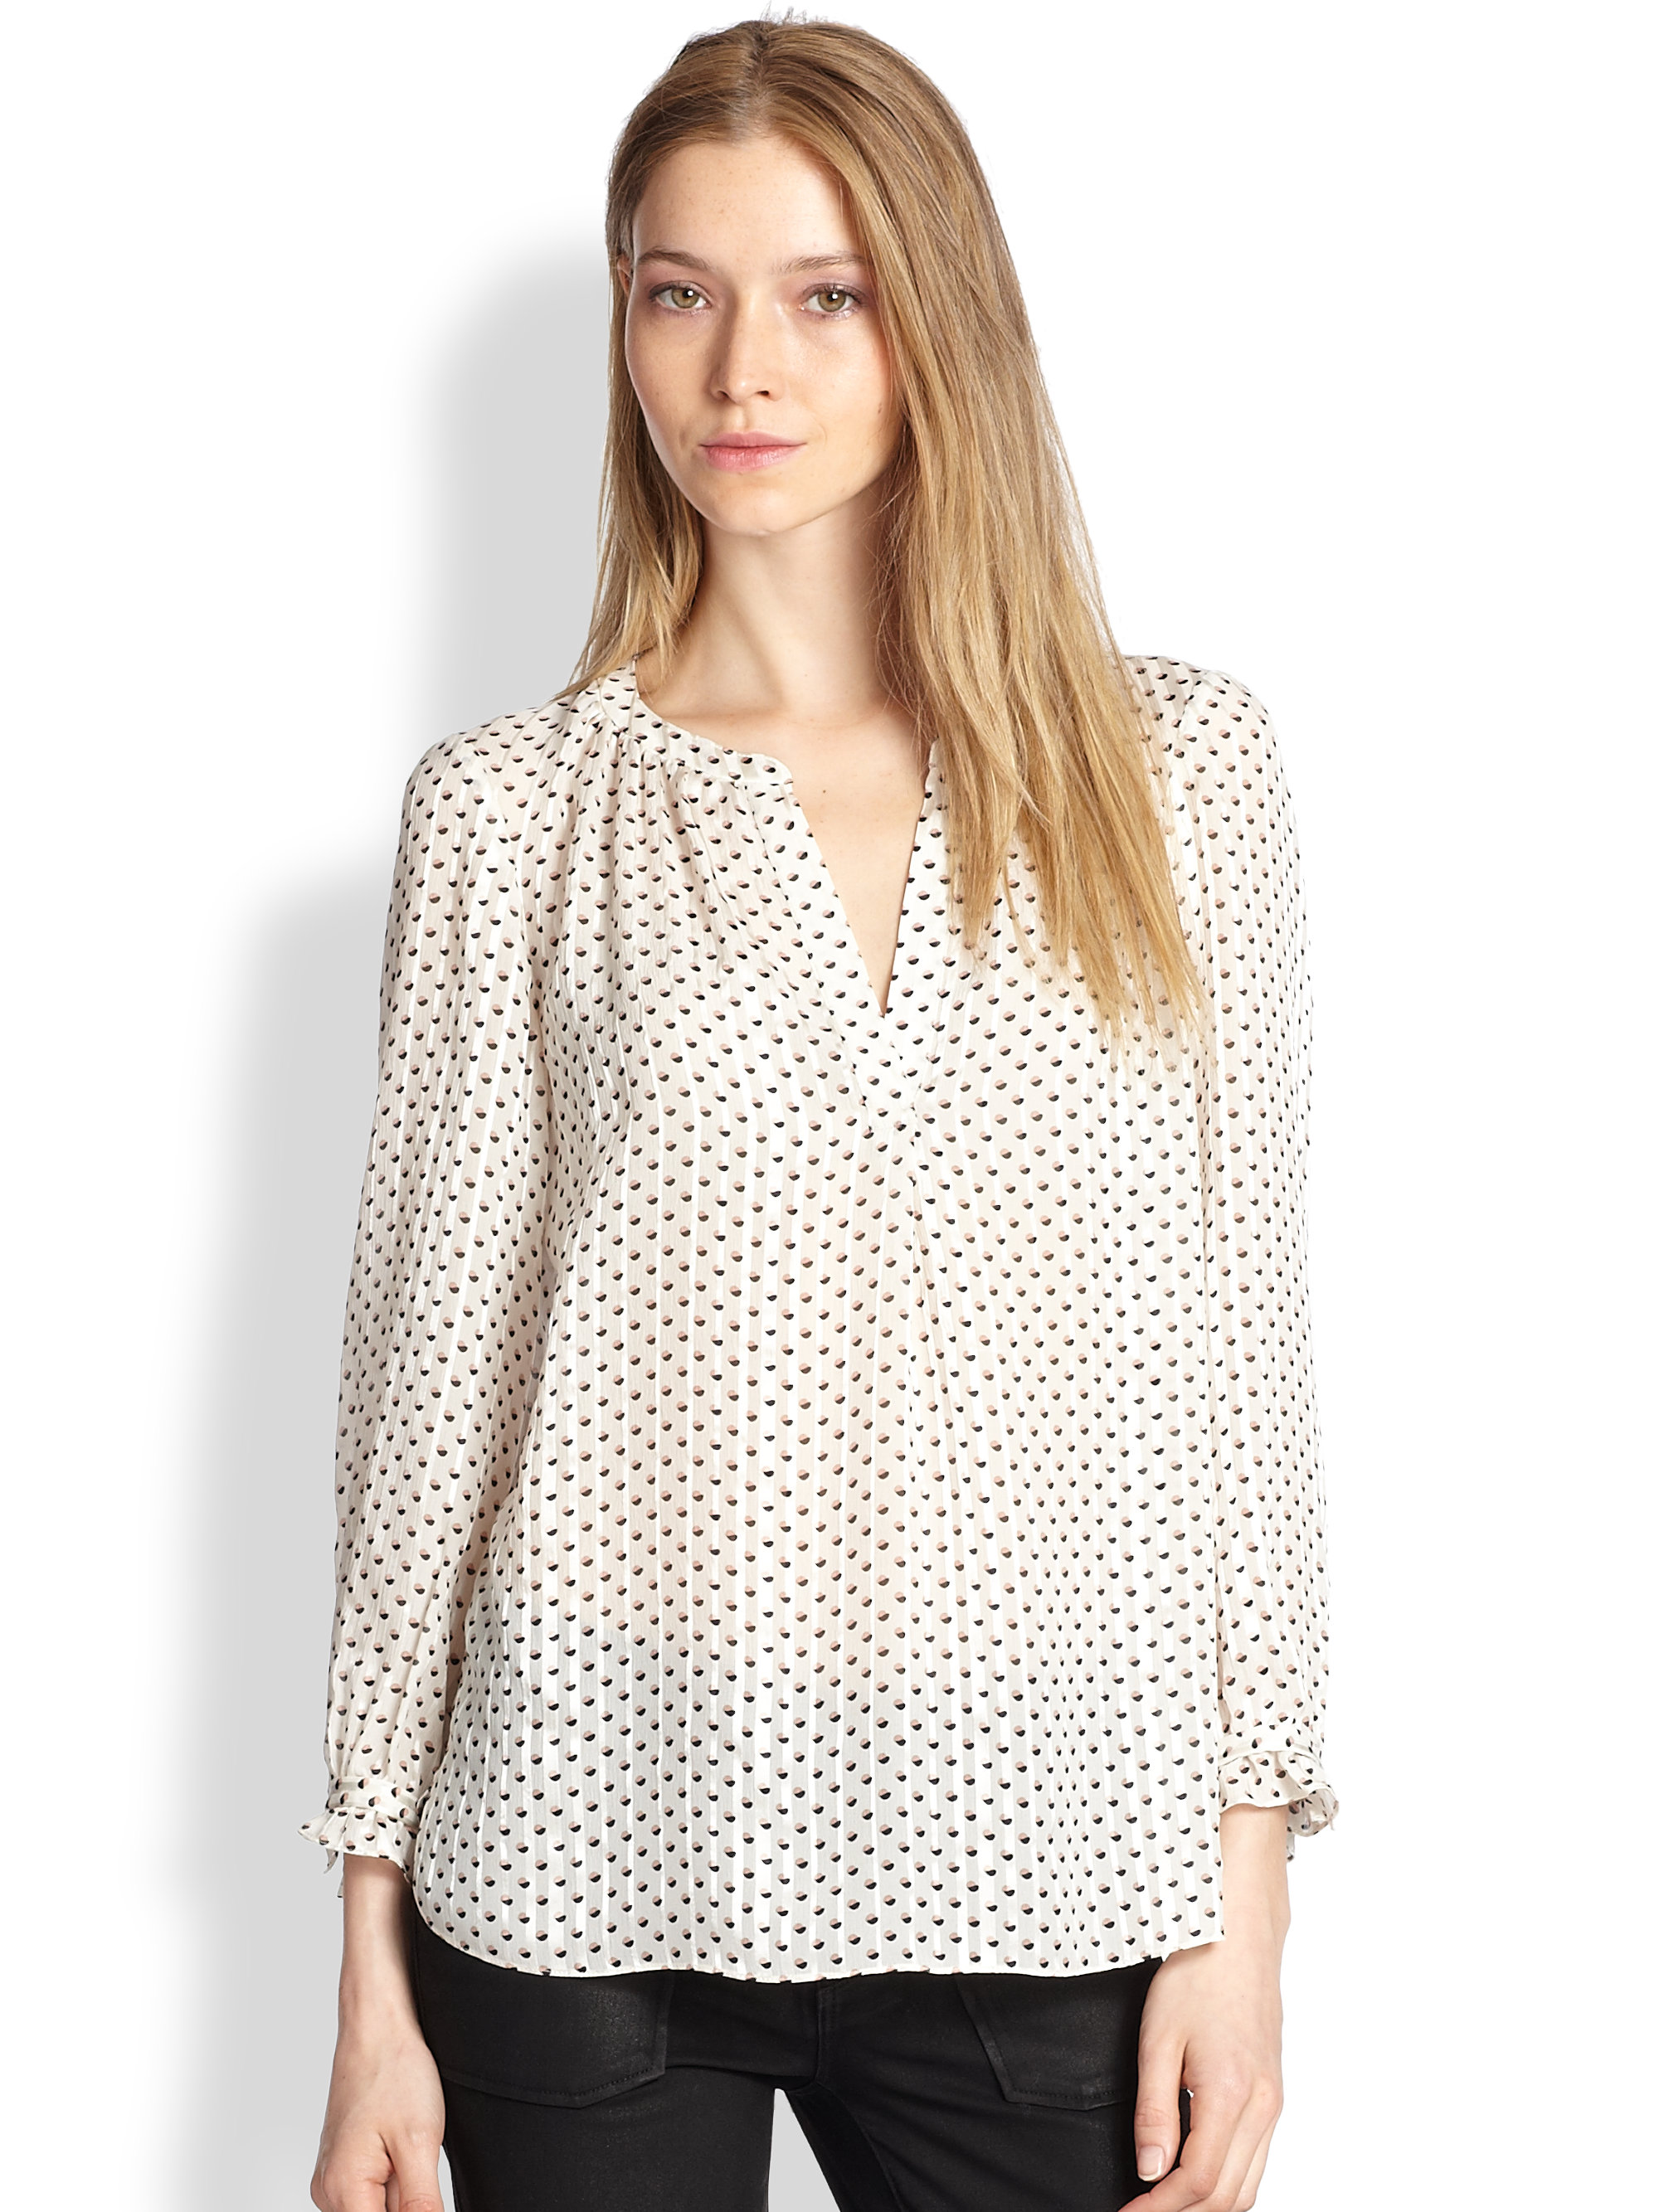 Lyst - Marc By Marc Jacobs Minetta Polkadot Silk Blouse in White